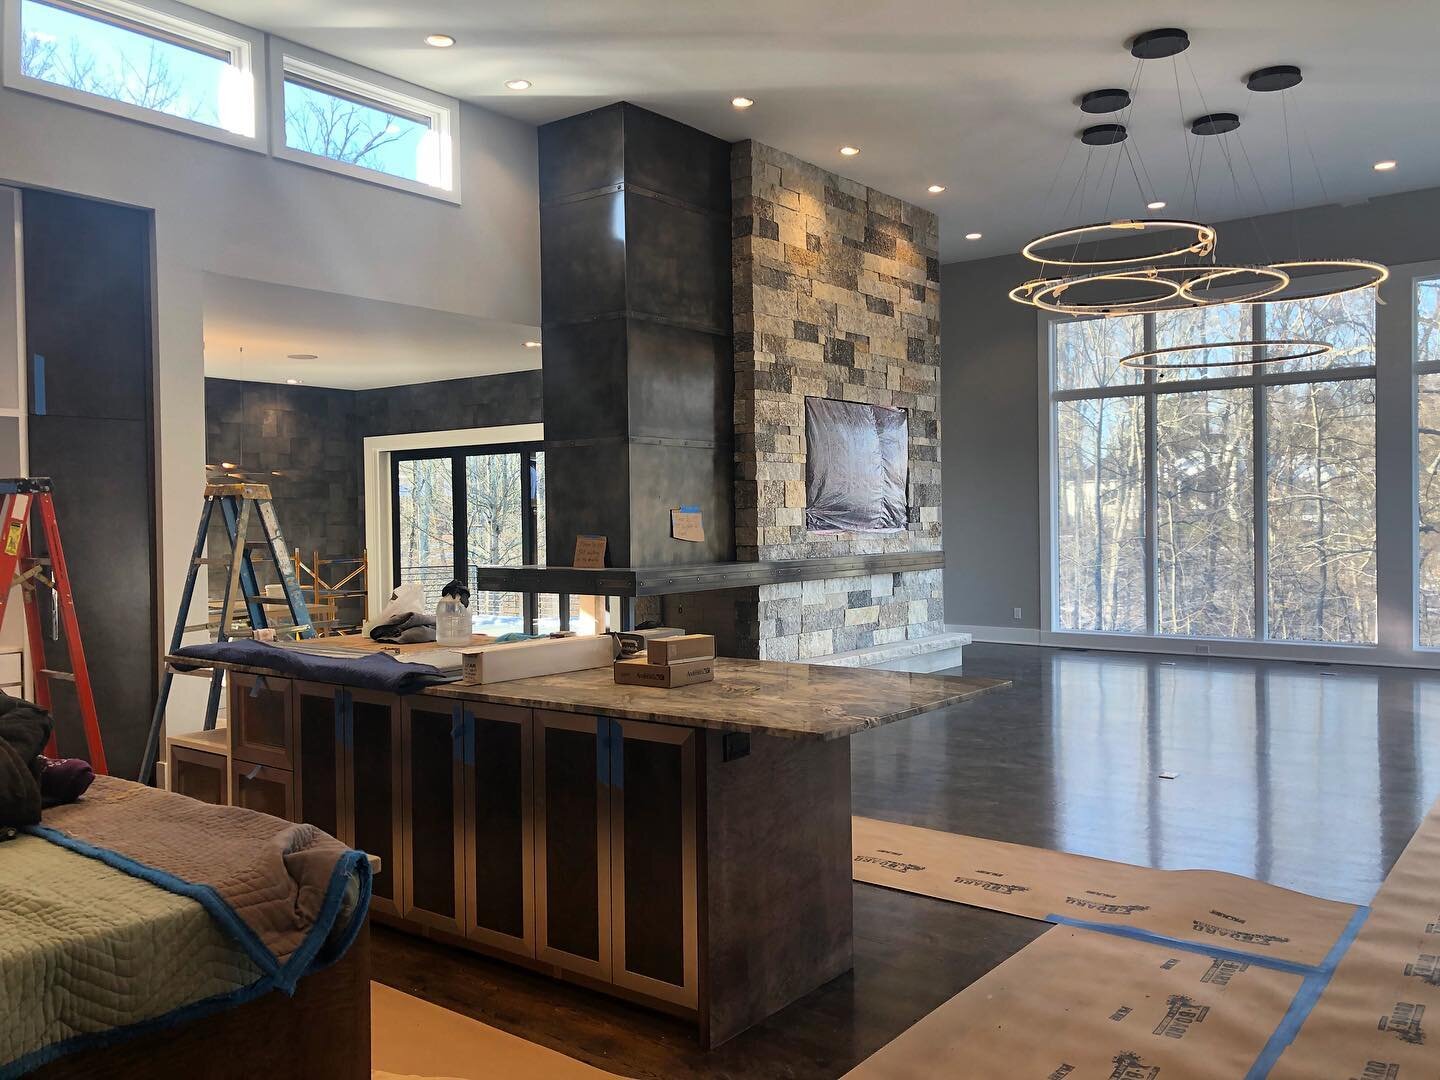 &bull;
&bull;
A little midweek throwback to when our project in Indian Hill was inching toward the finish line and the finishes were really pulling all the spaces together ▪️
Furniture and artwork have been installed, and we can&rsquo;t wait until we